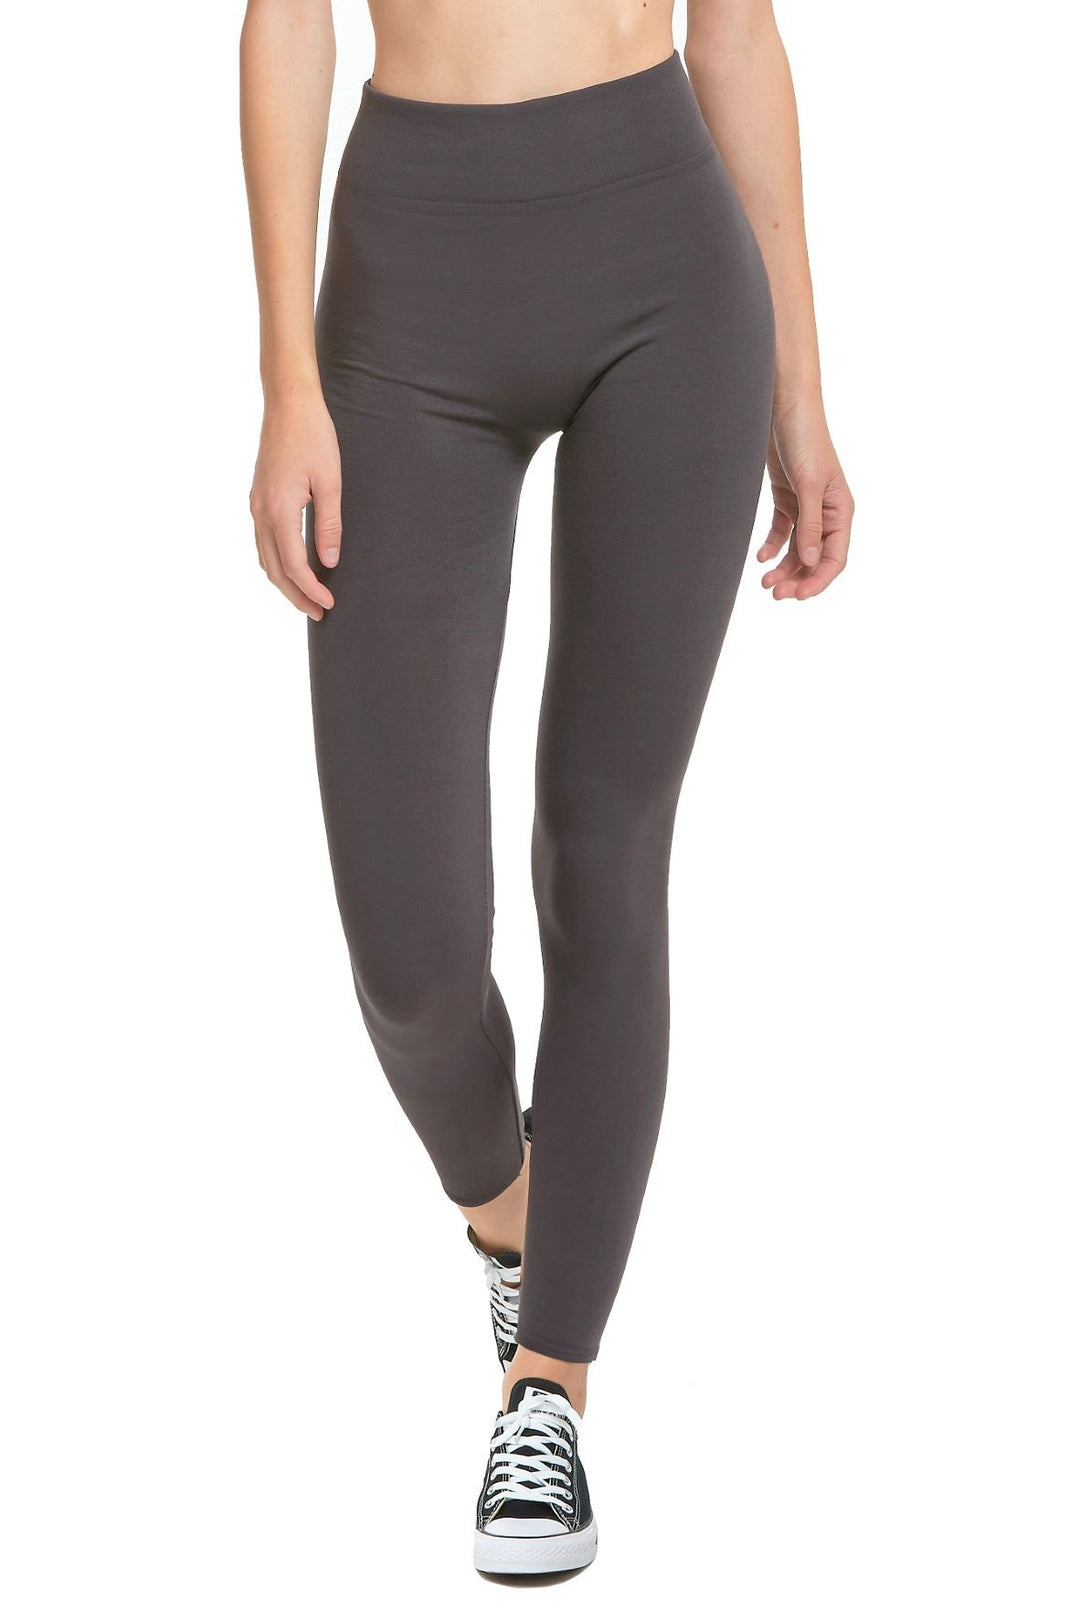 Seamless Inspire Leggings - The Charmed Collection